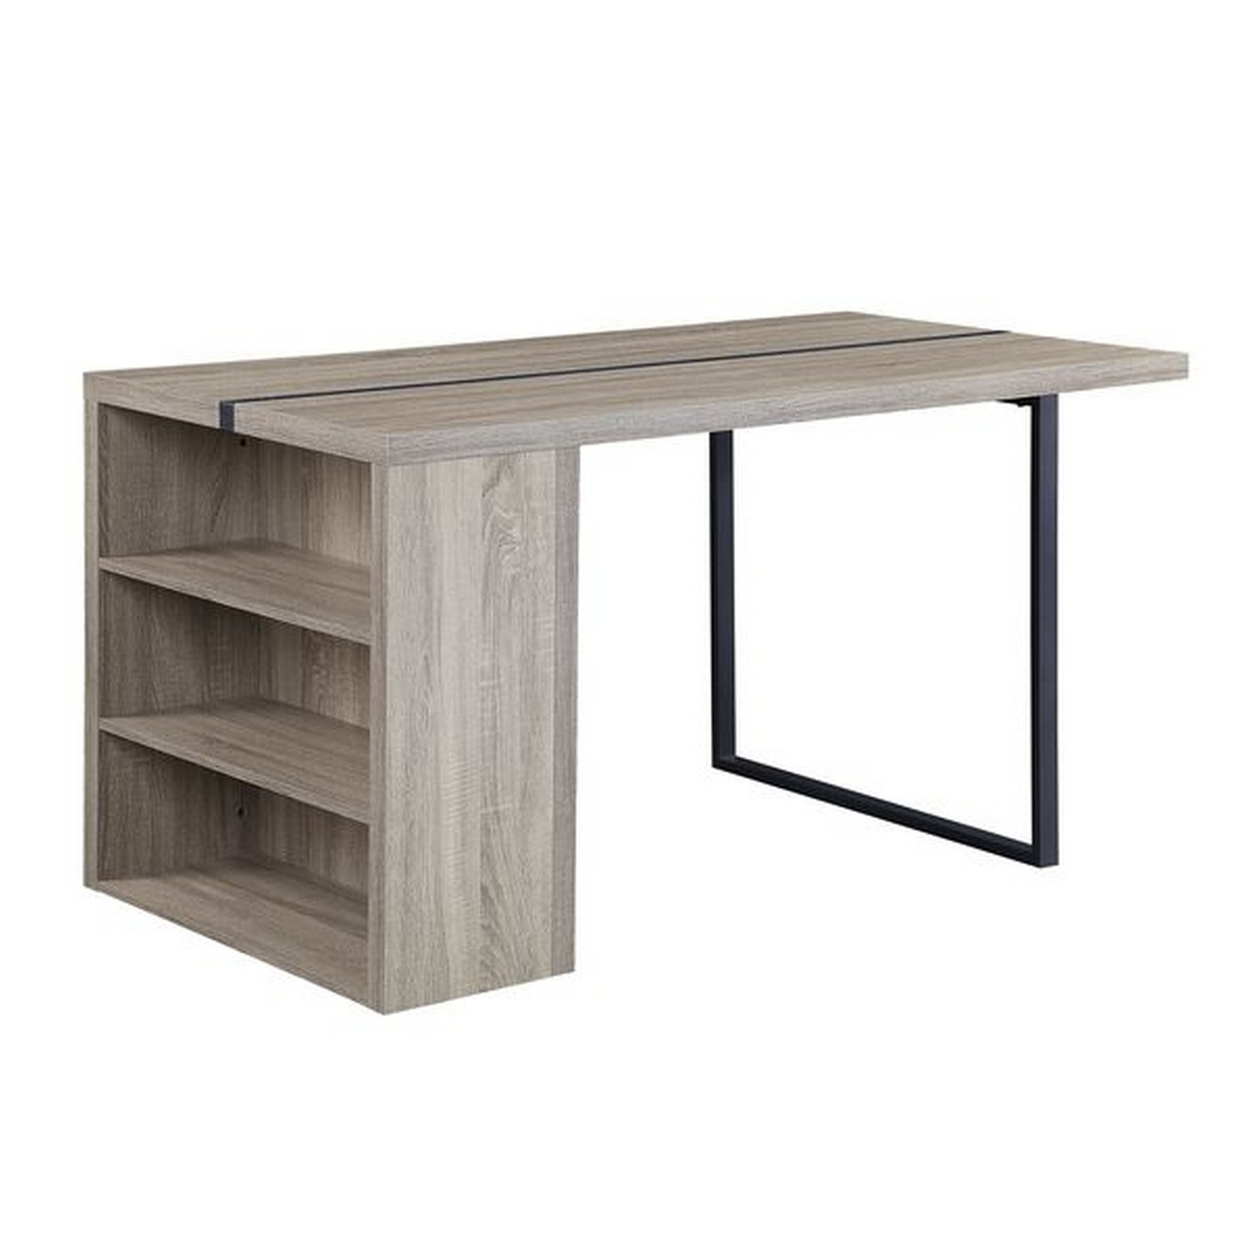 Dining Table With 3 Side Open Compartments And Metal Trim Inlay, Oak Gray- Saltoro Sherpi